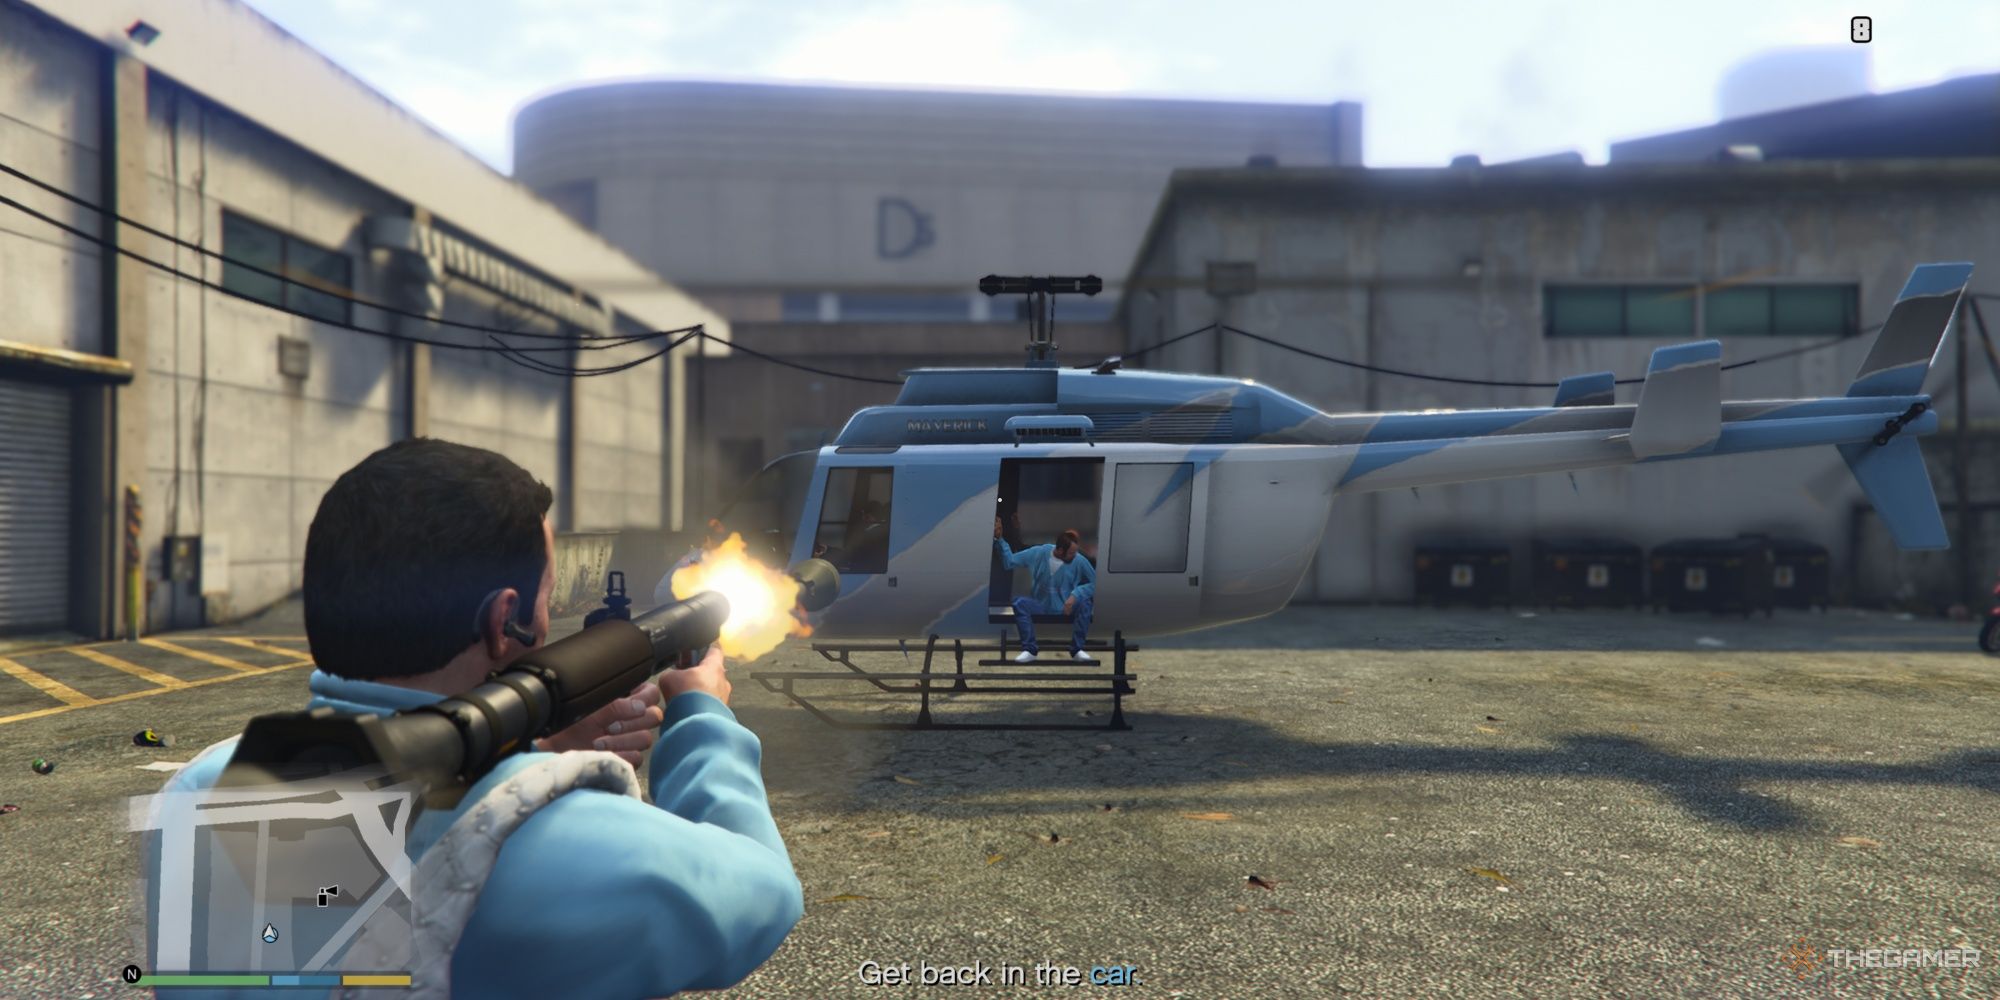 Michael shooting a rocket at an Epsilon helicopter in GTA5